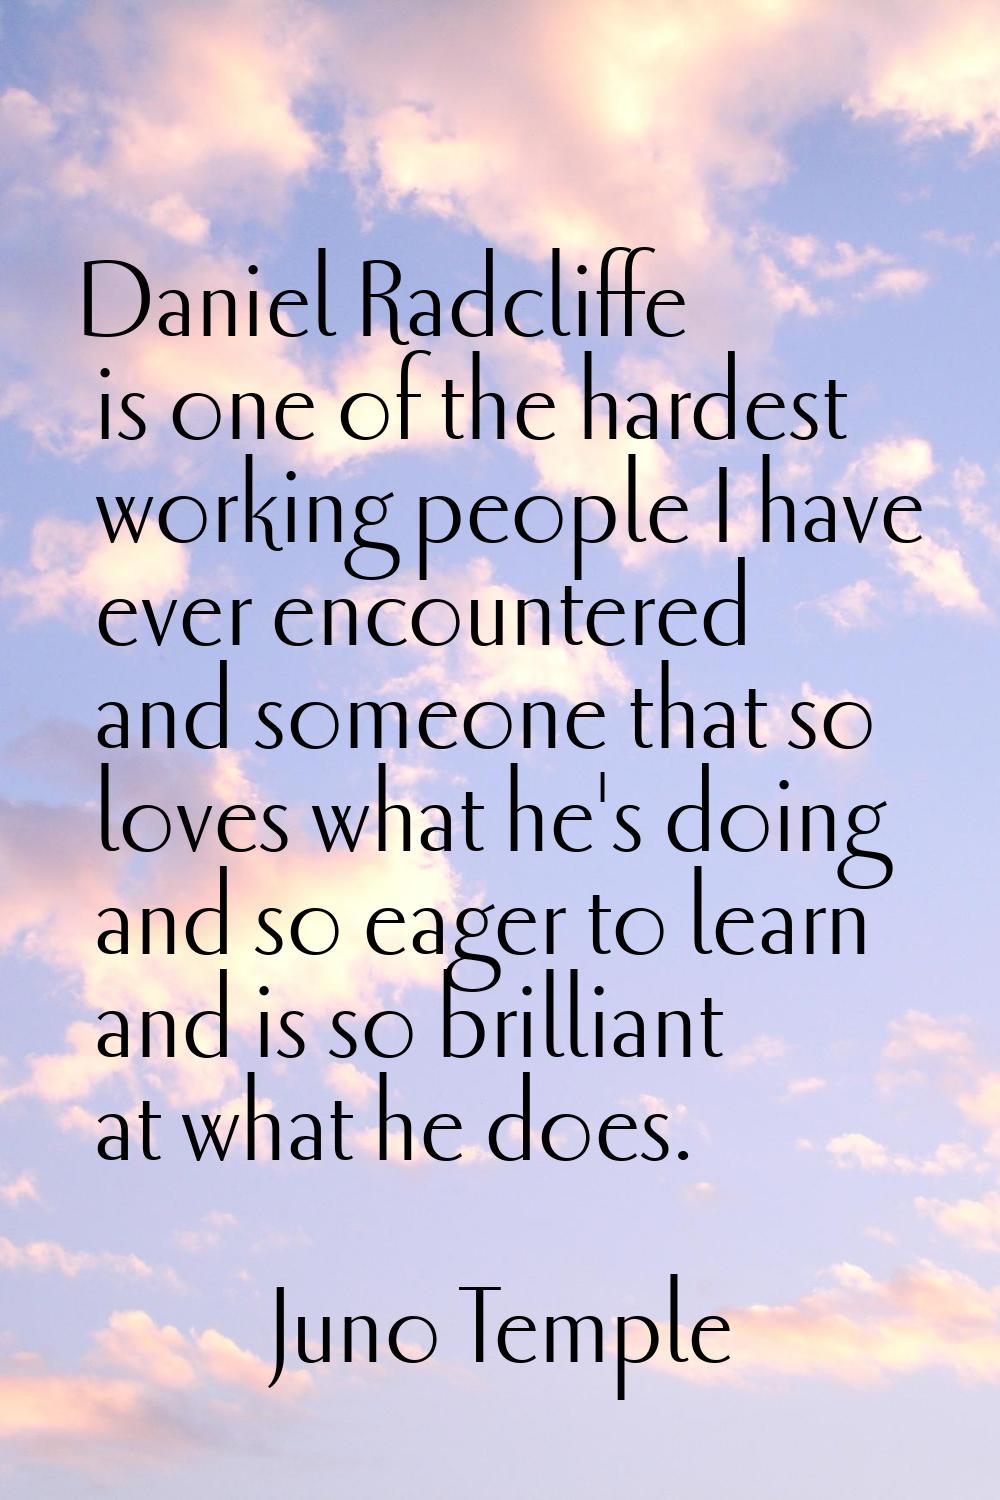 Daniel Radcliffe is one of the hardest working people I have ever encountered and someone that so l